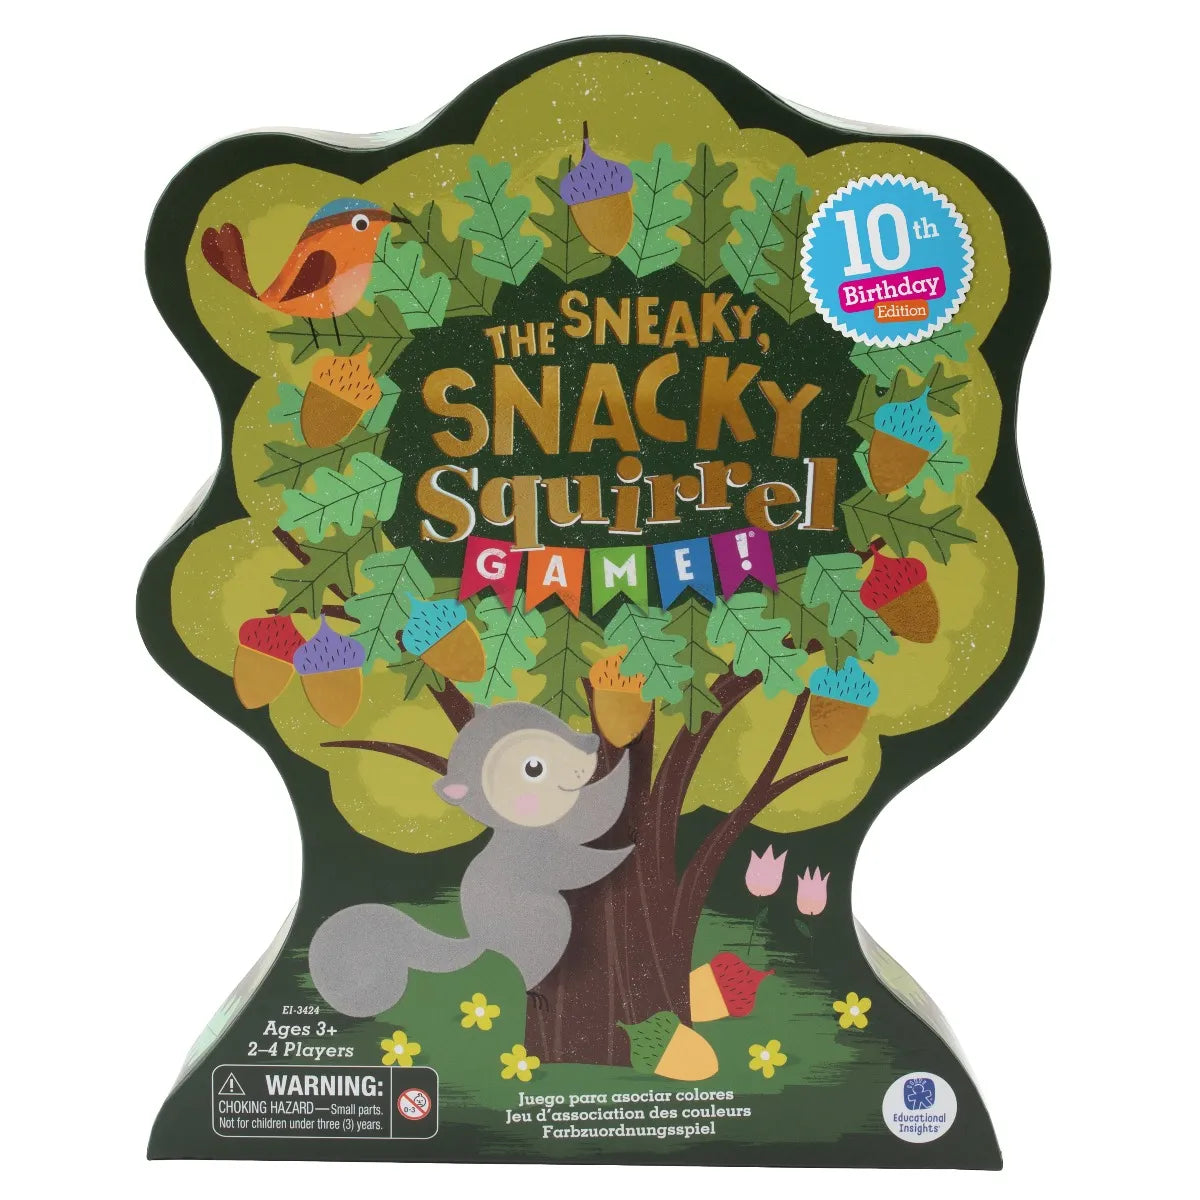 The Sneaky, Snacky Squirrel Game!® Special Edition - MoonyBoon